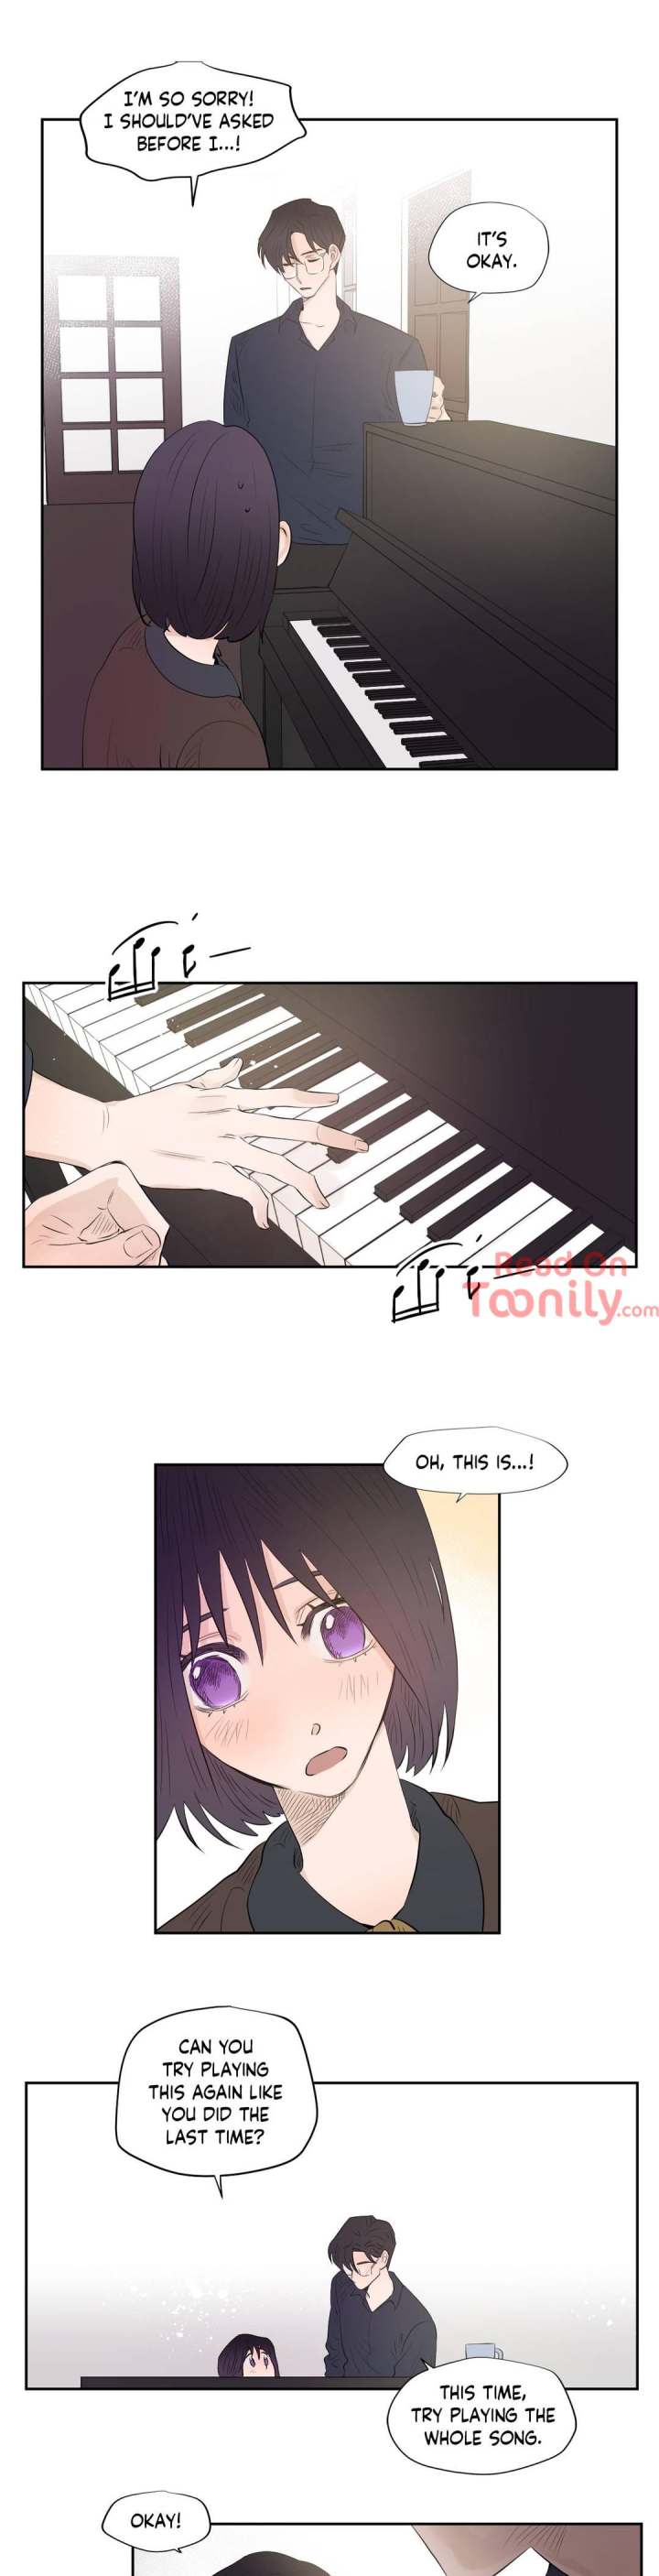 Broken Melody - Chapter 6 Page 5